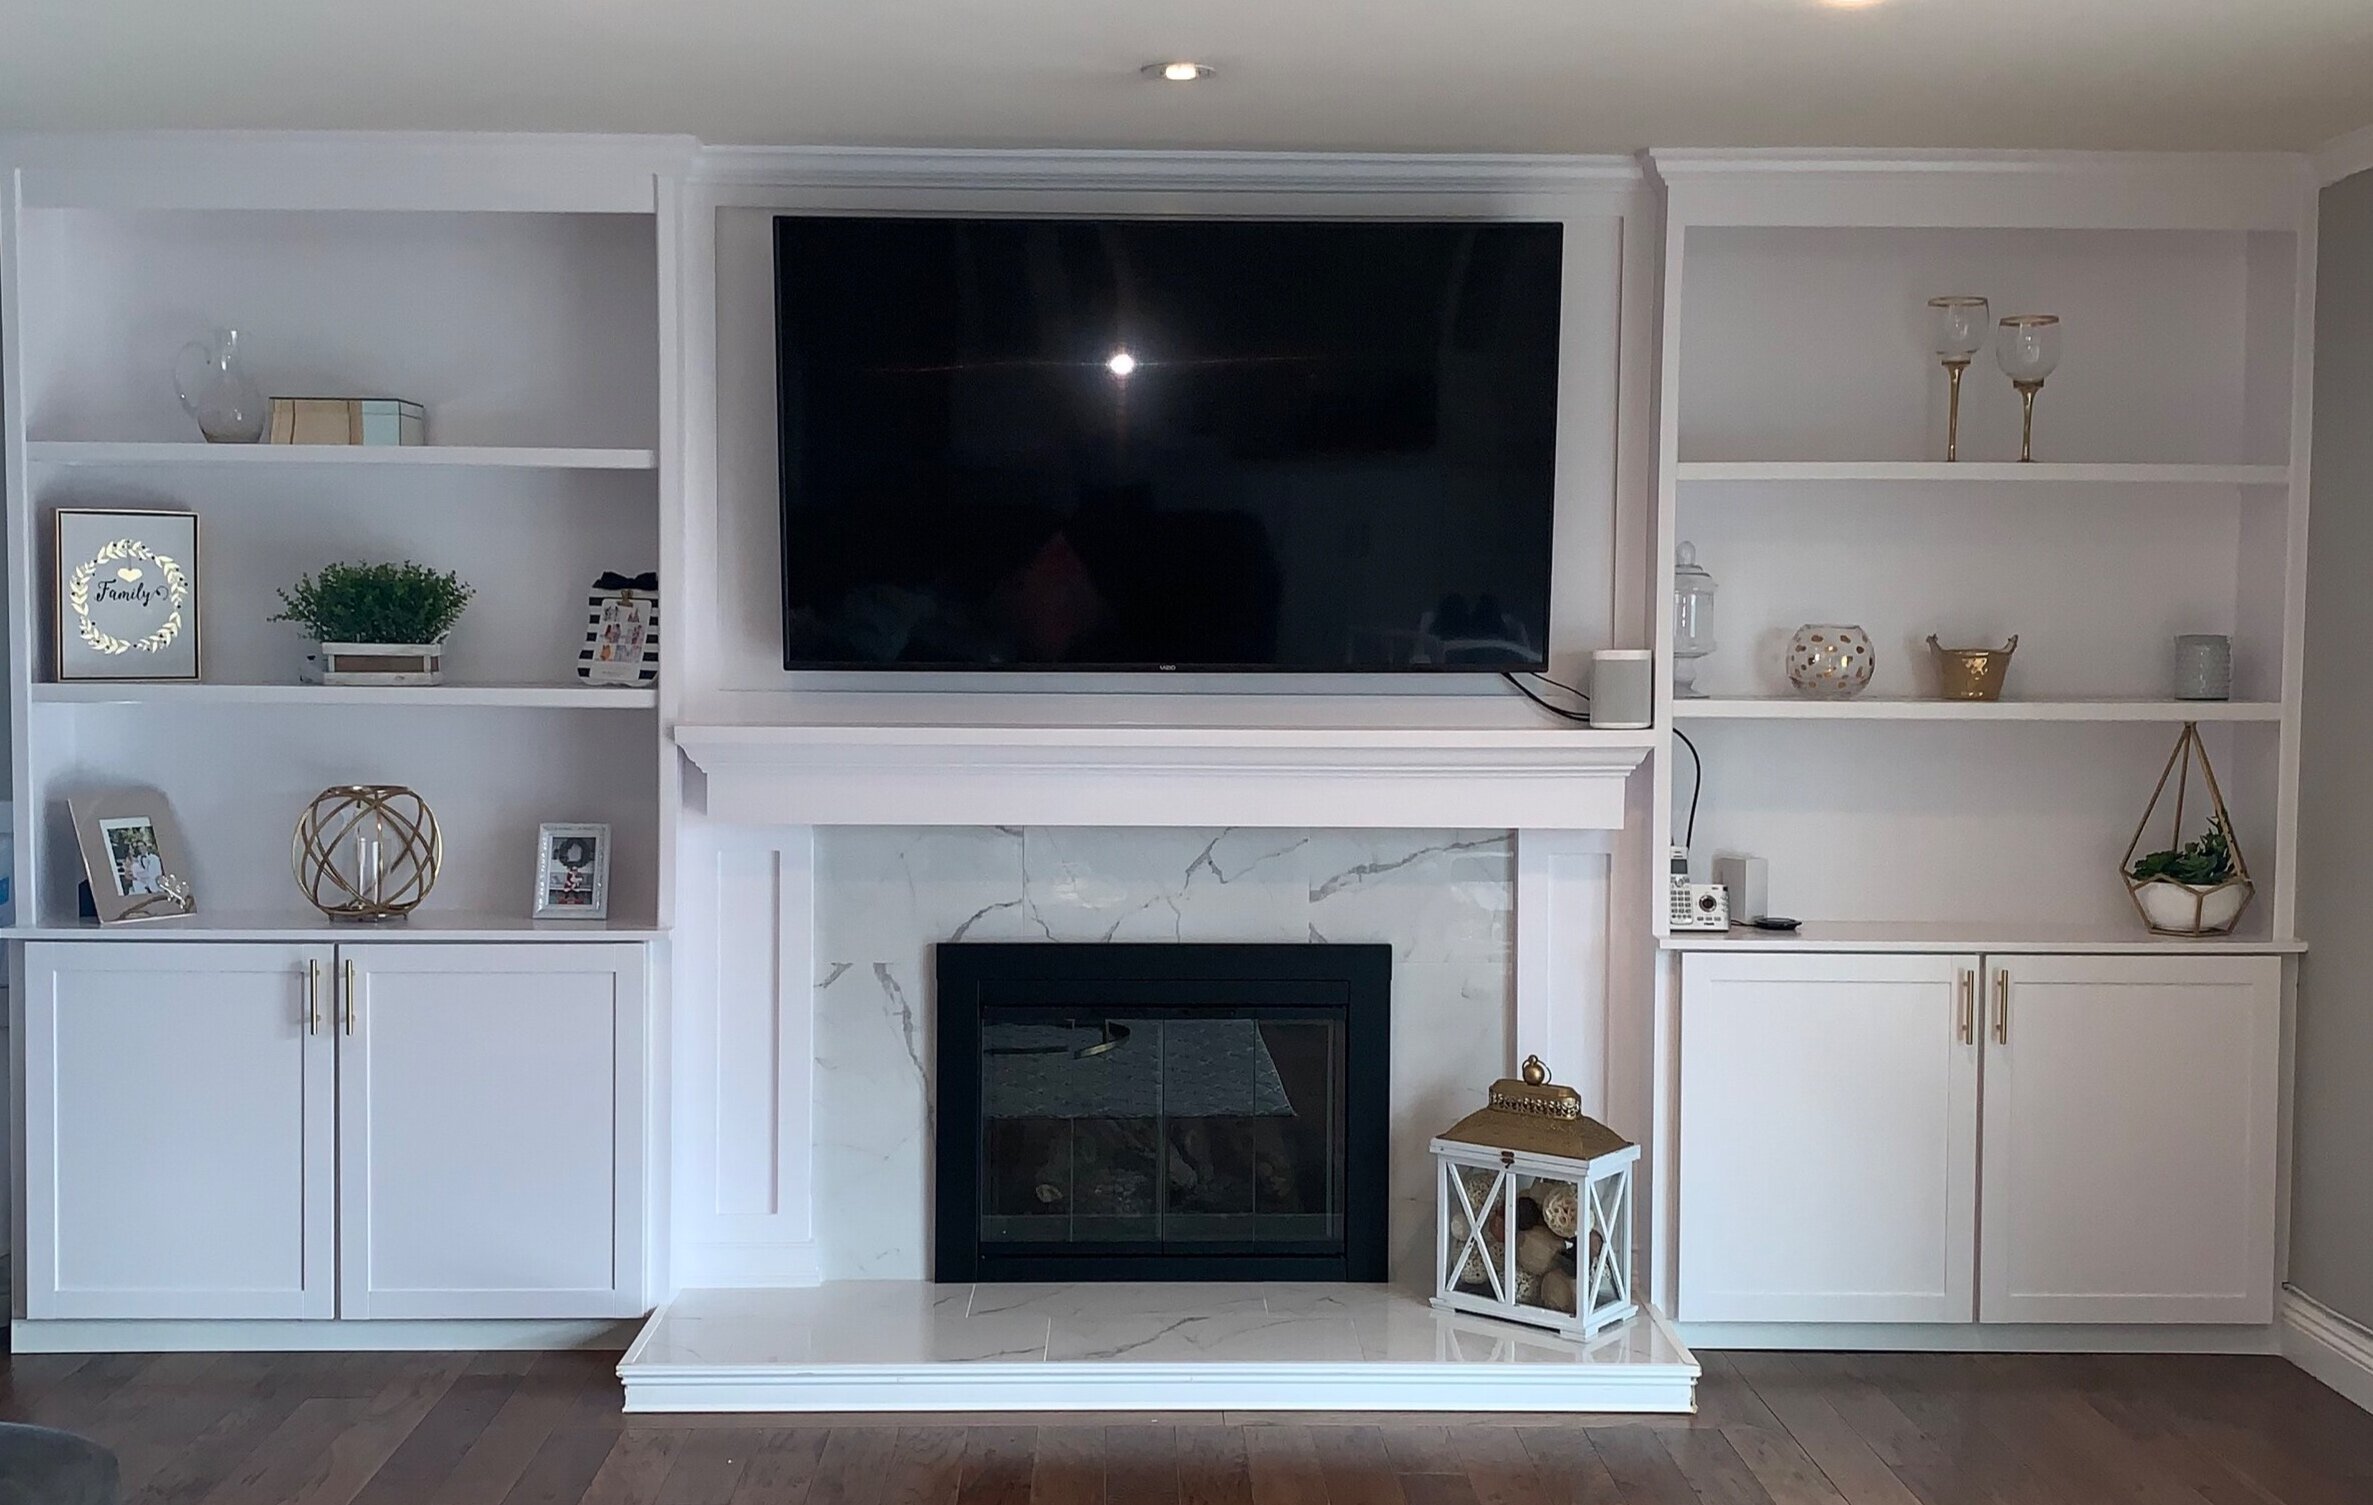 Diy Fireplace Surround And Built Ins, Fireplace Mantle Between Bookcases